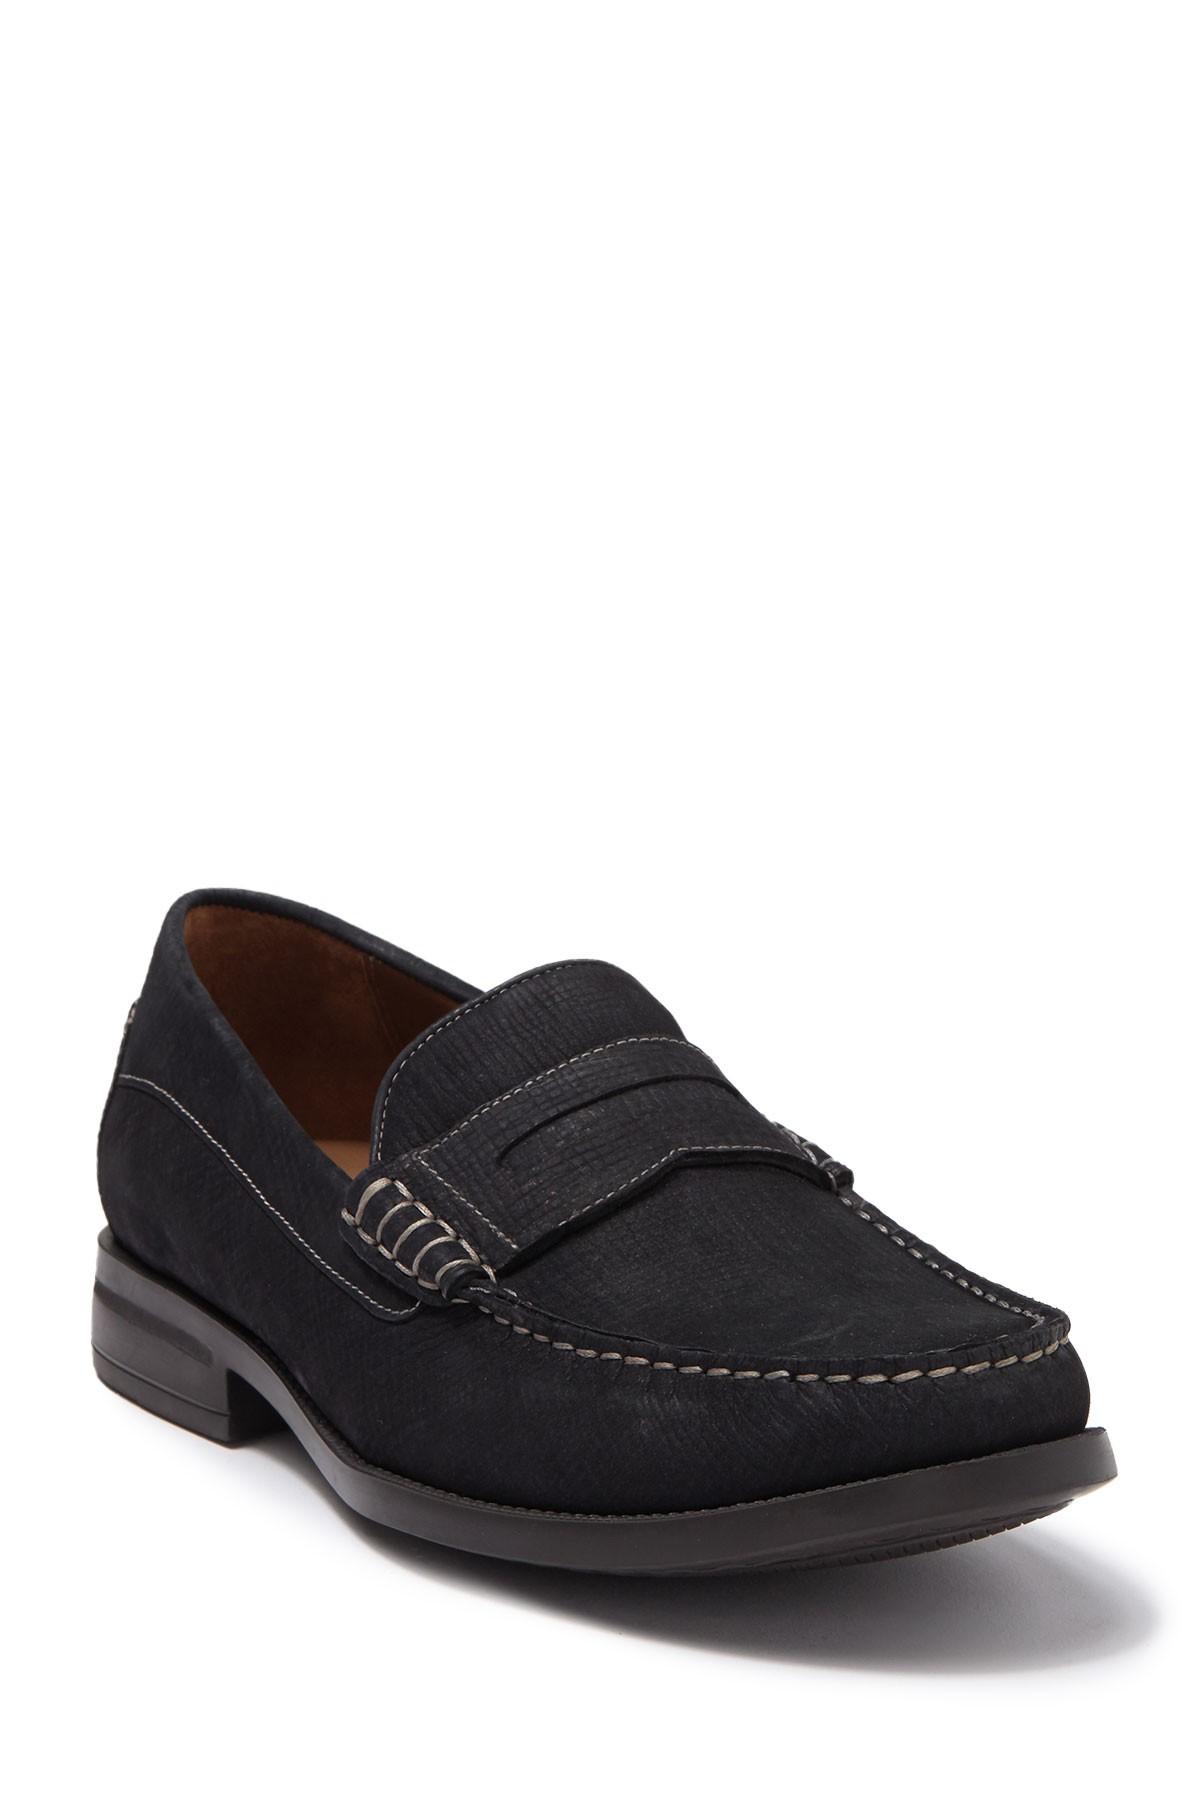 Johnston & Murphy Leather Chadwell Penny Loafer in Navy (Blue) for Men ...